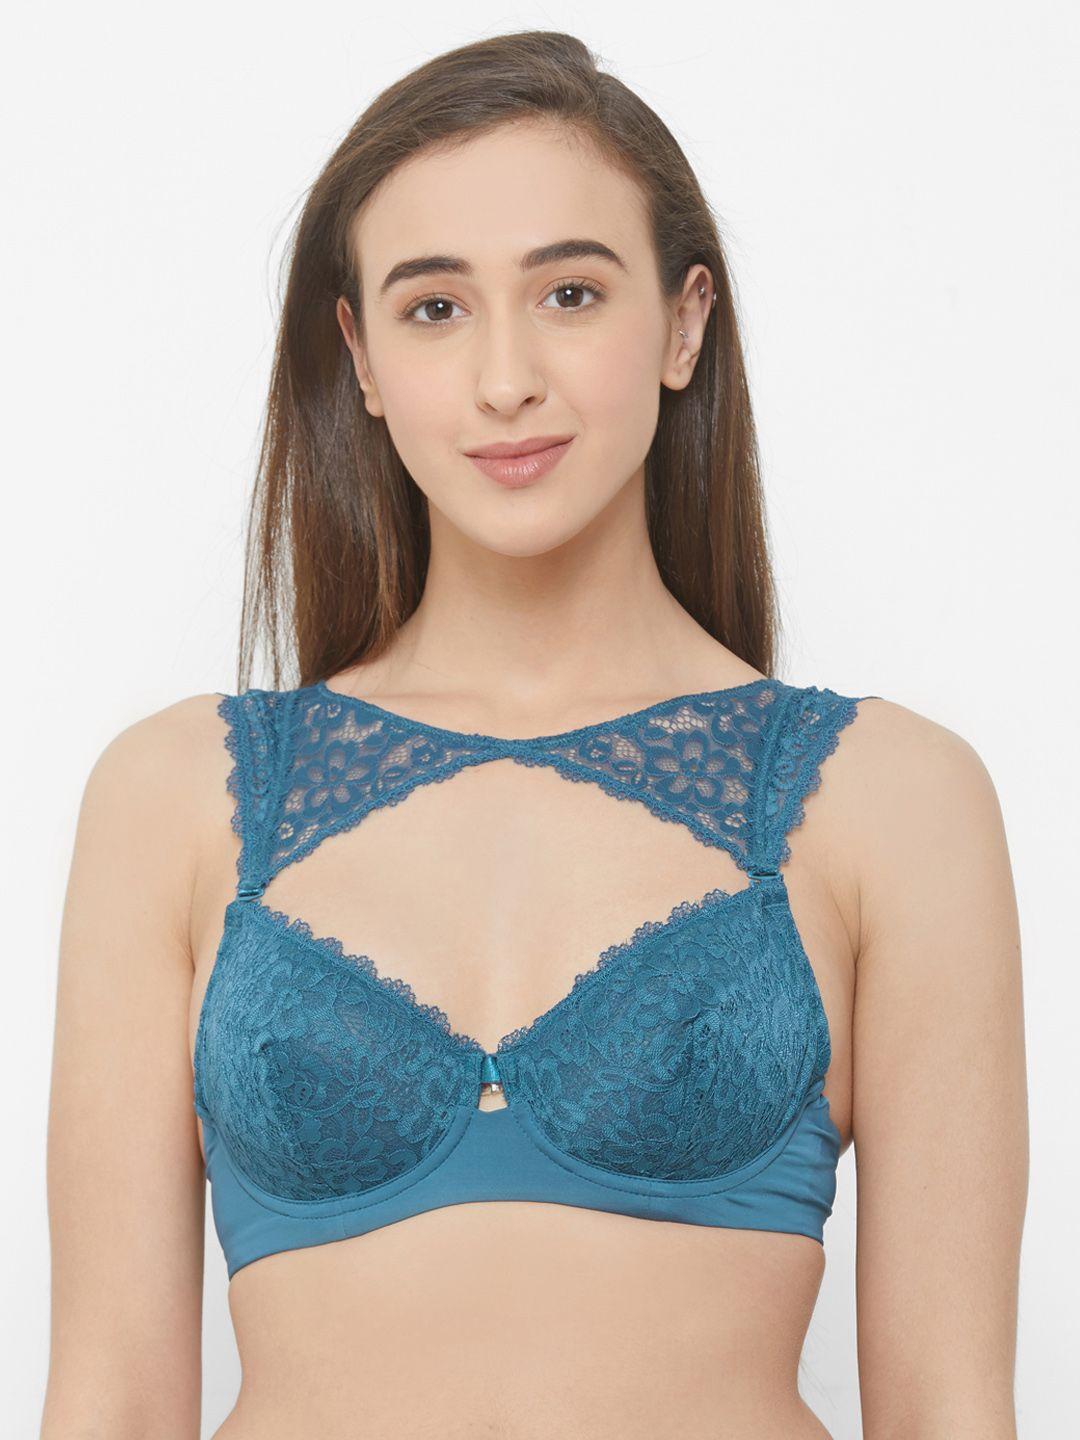 soie teal blue lace underwired demi cup non padded balconette bra